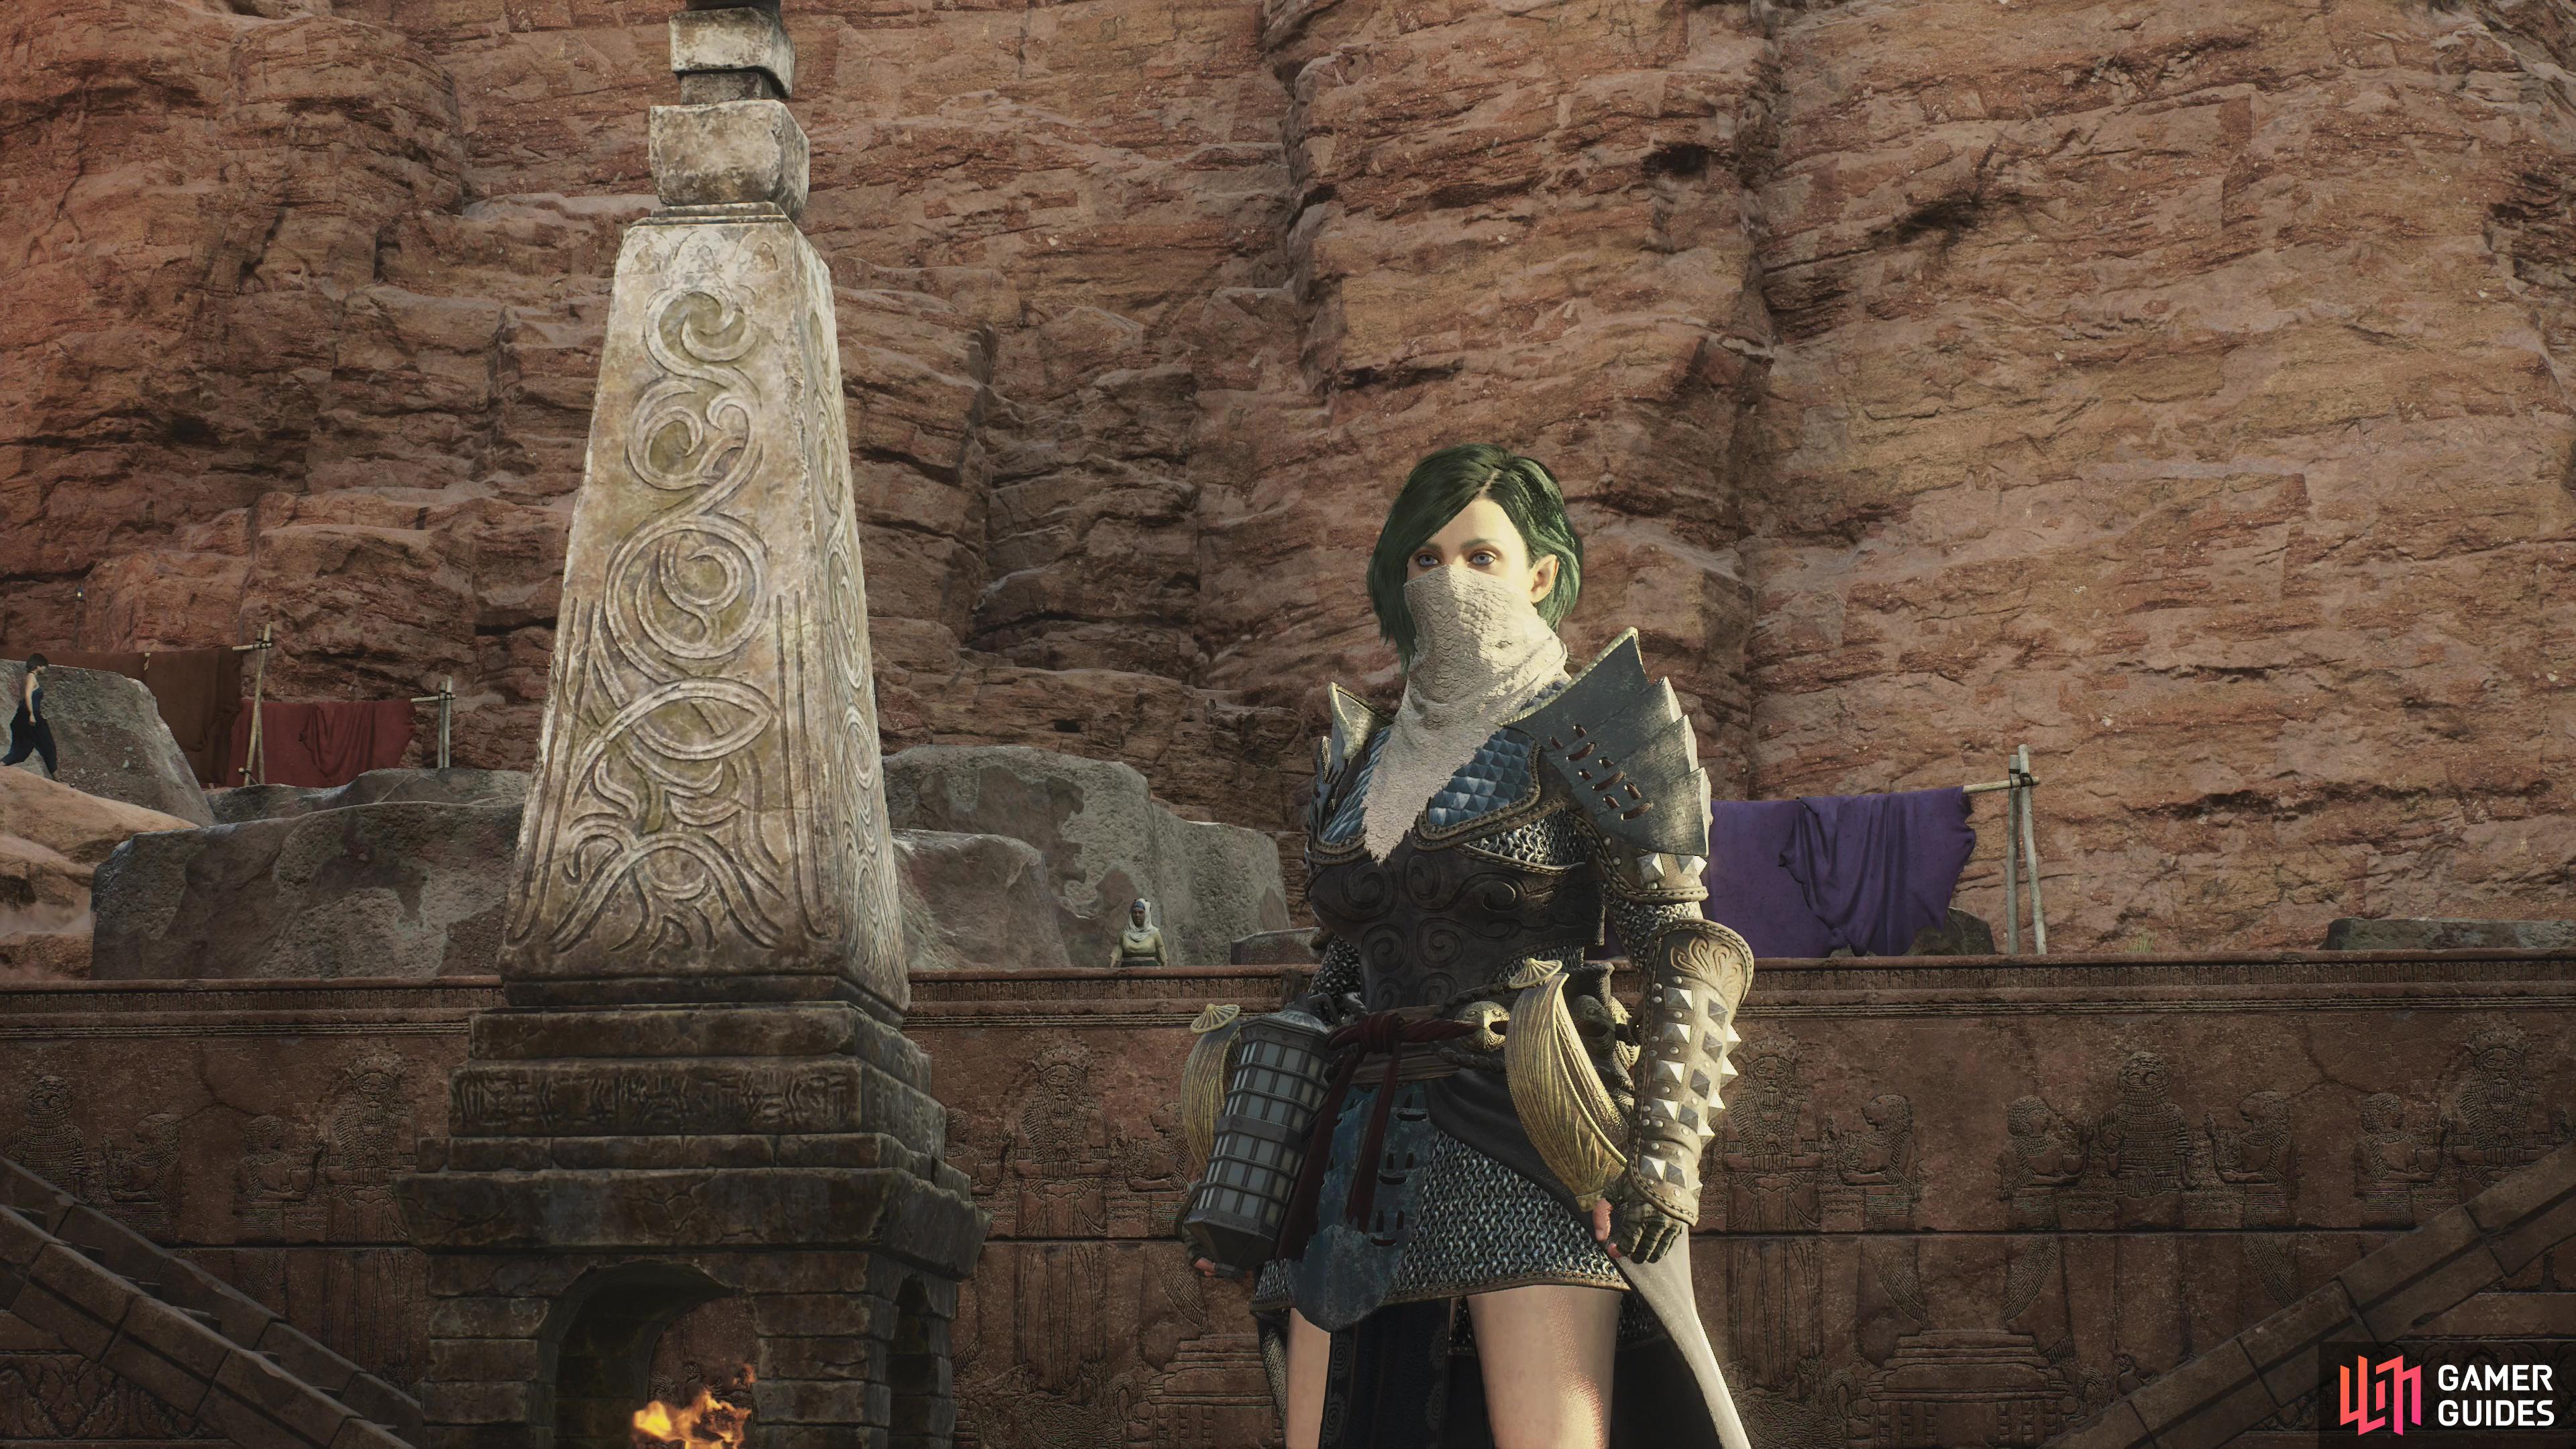 The Thief in Dragons’ Dogma is a DPS-focused class who focuses on dodging to keep themselves alive.